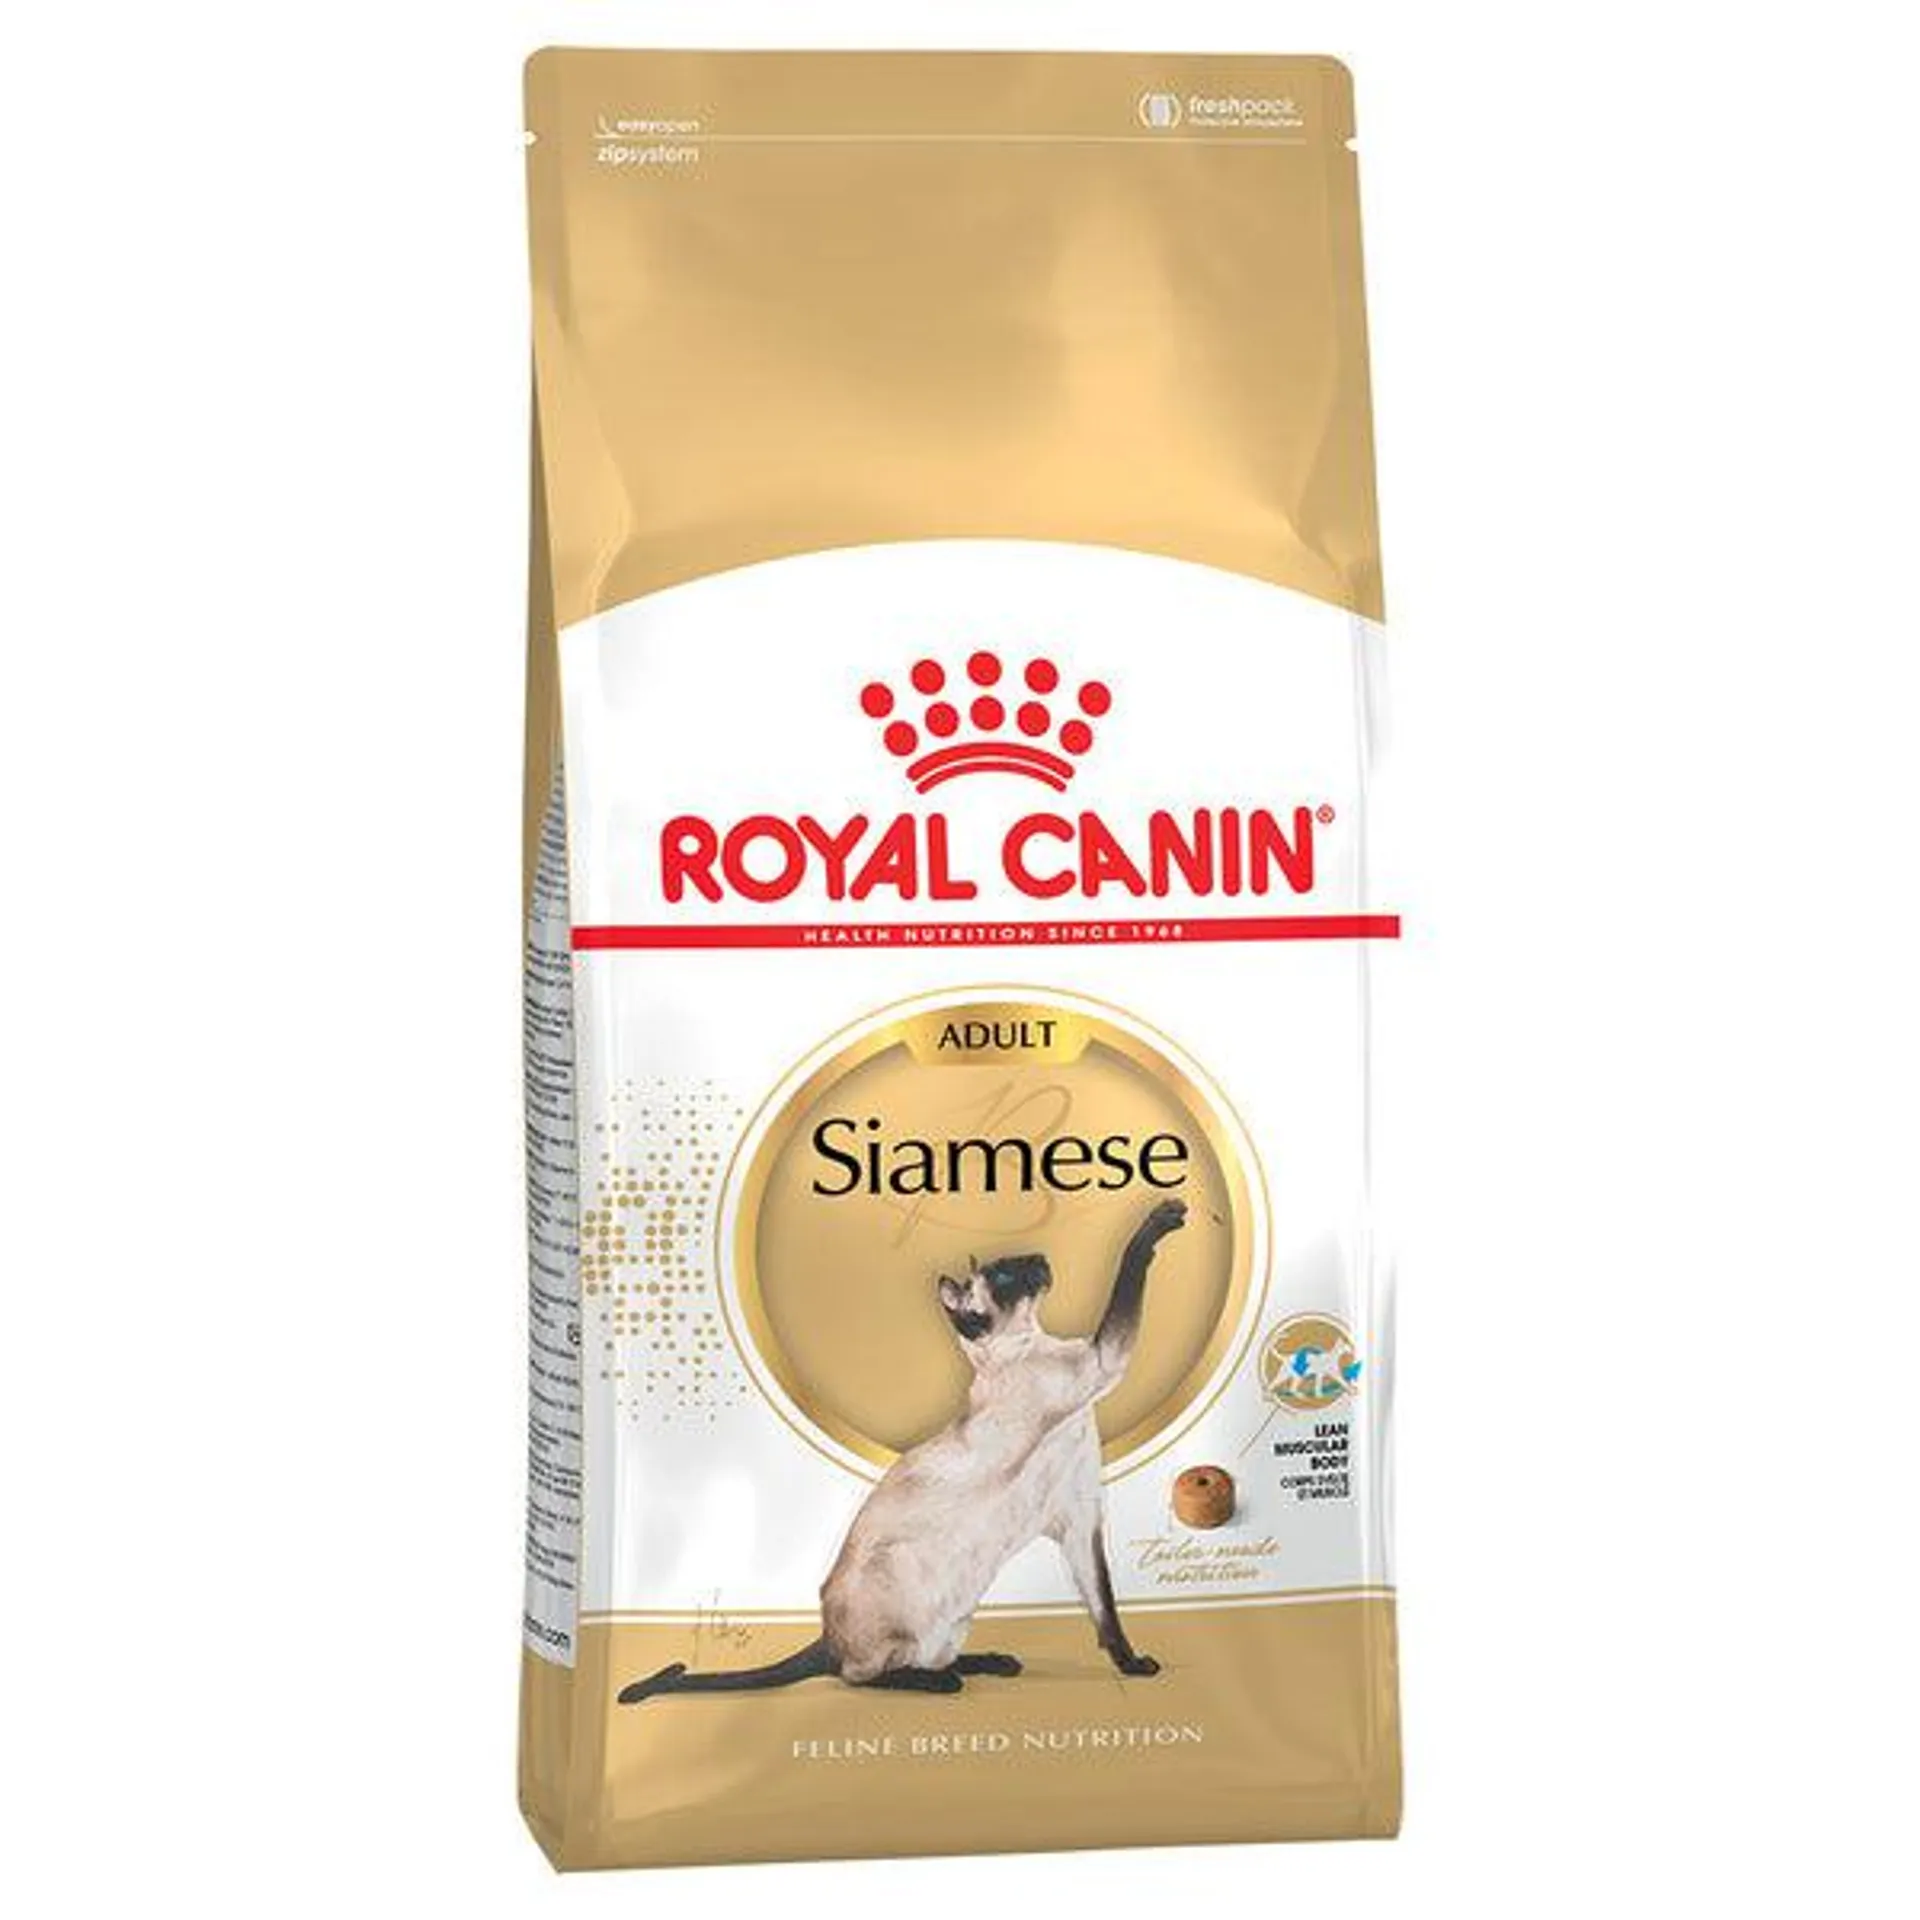 Royal Canin - Siamese Breed Adult Cat Dry Food (4kg)